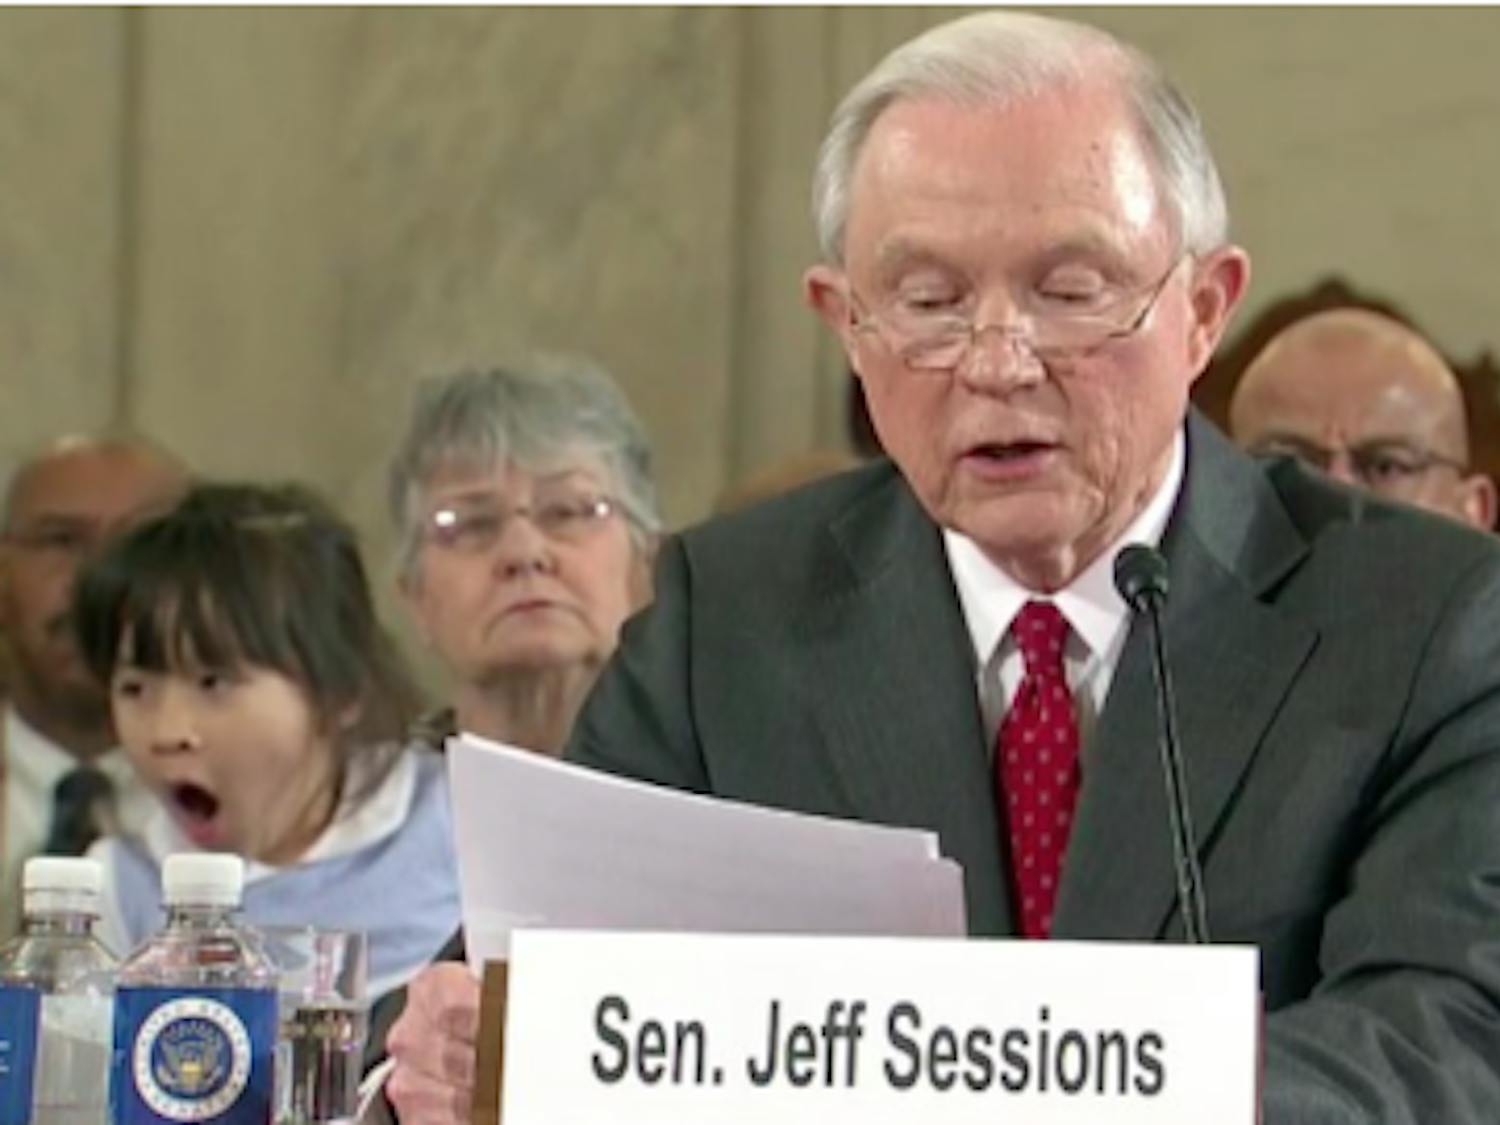 Jeff Sessions at his confirmation hearing for Attorney General​